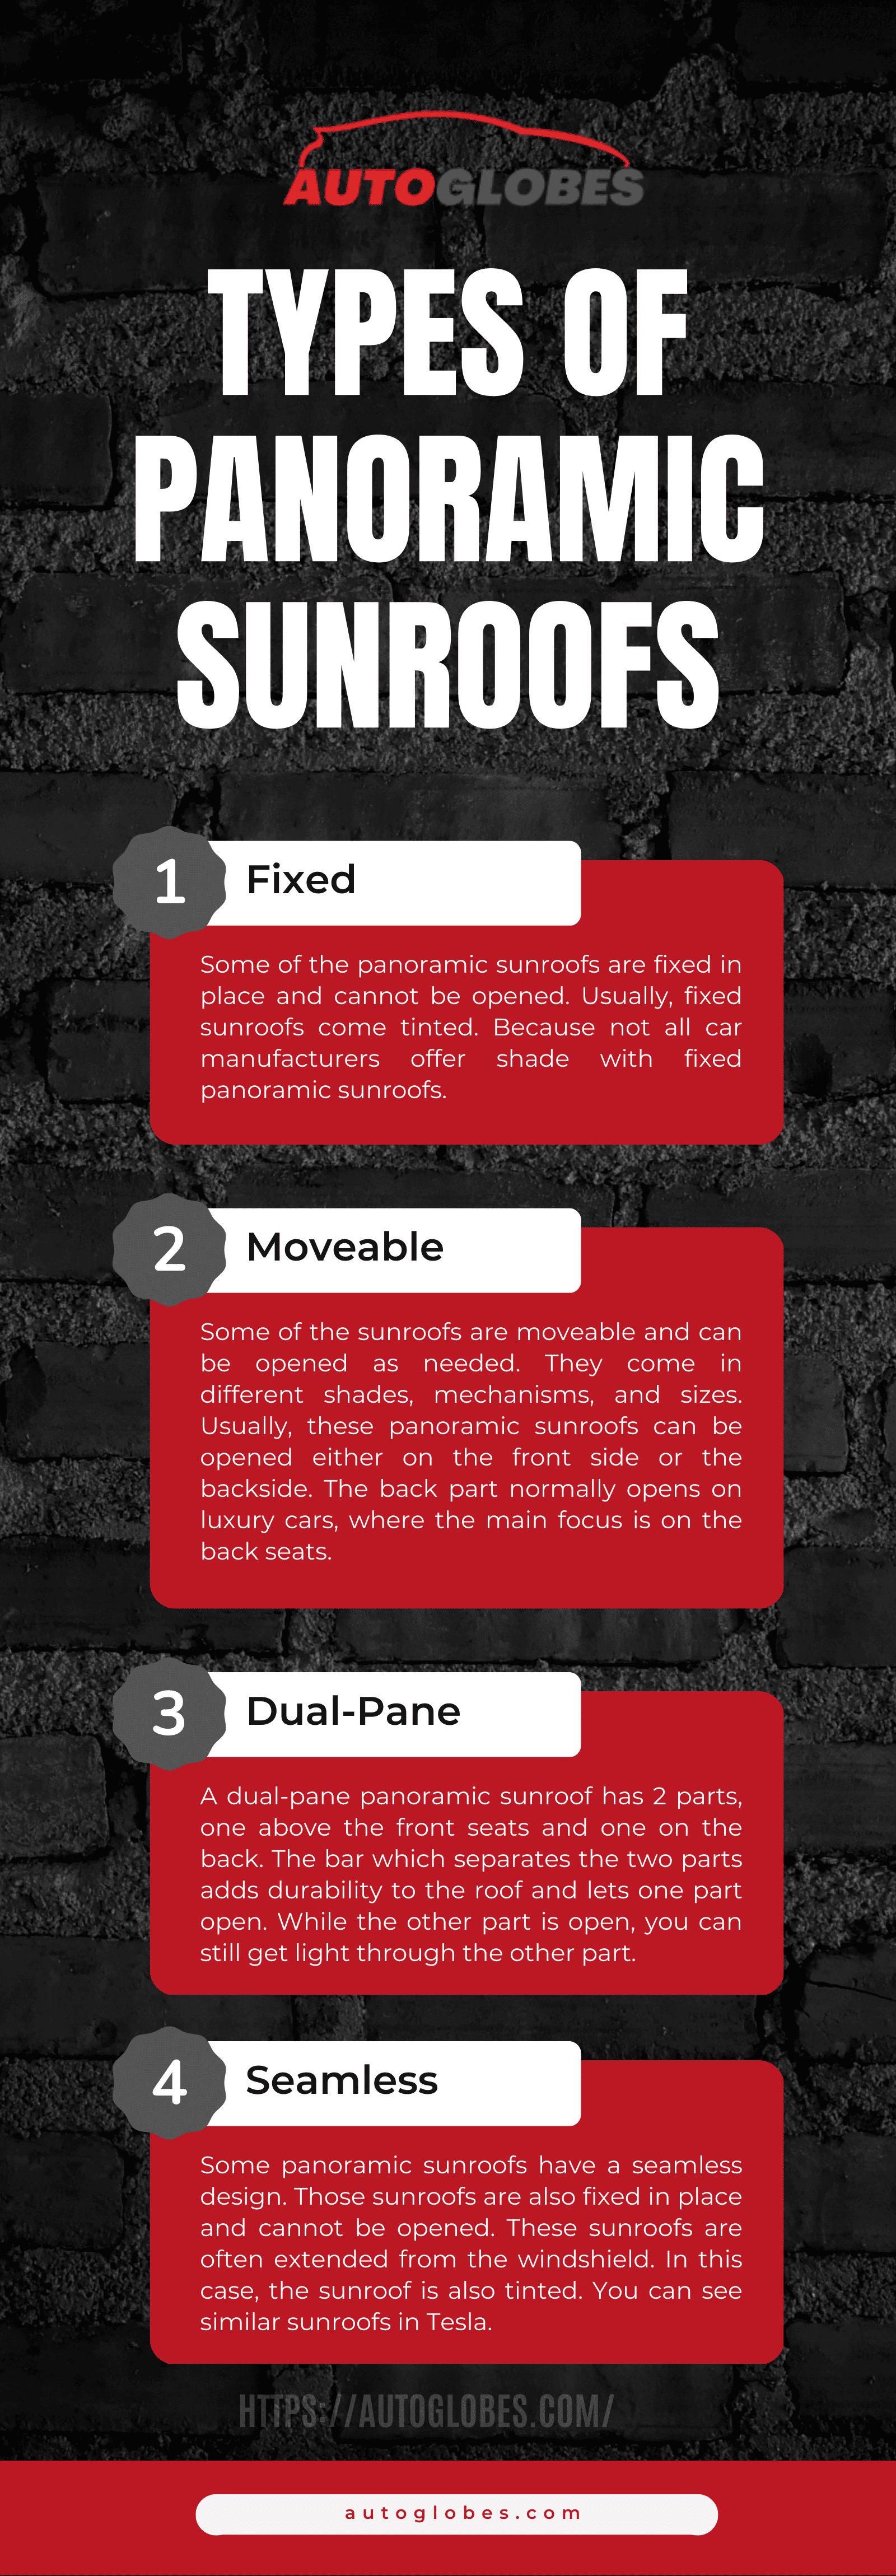 Types of Panoramic Sunroofs Infographic